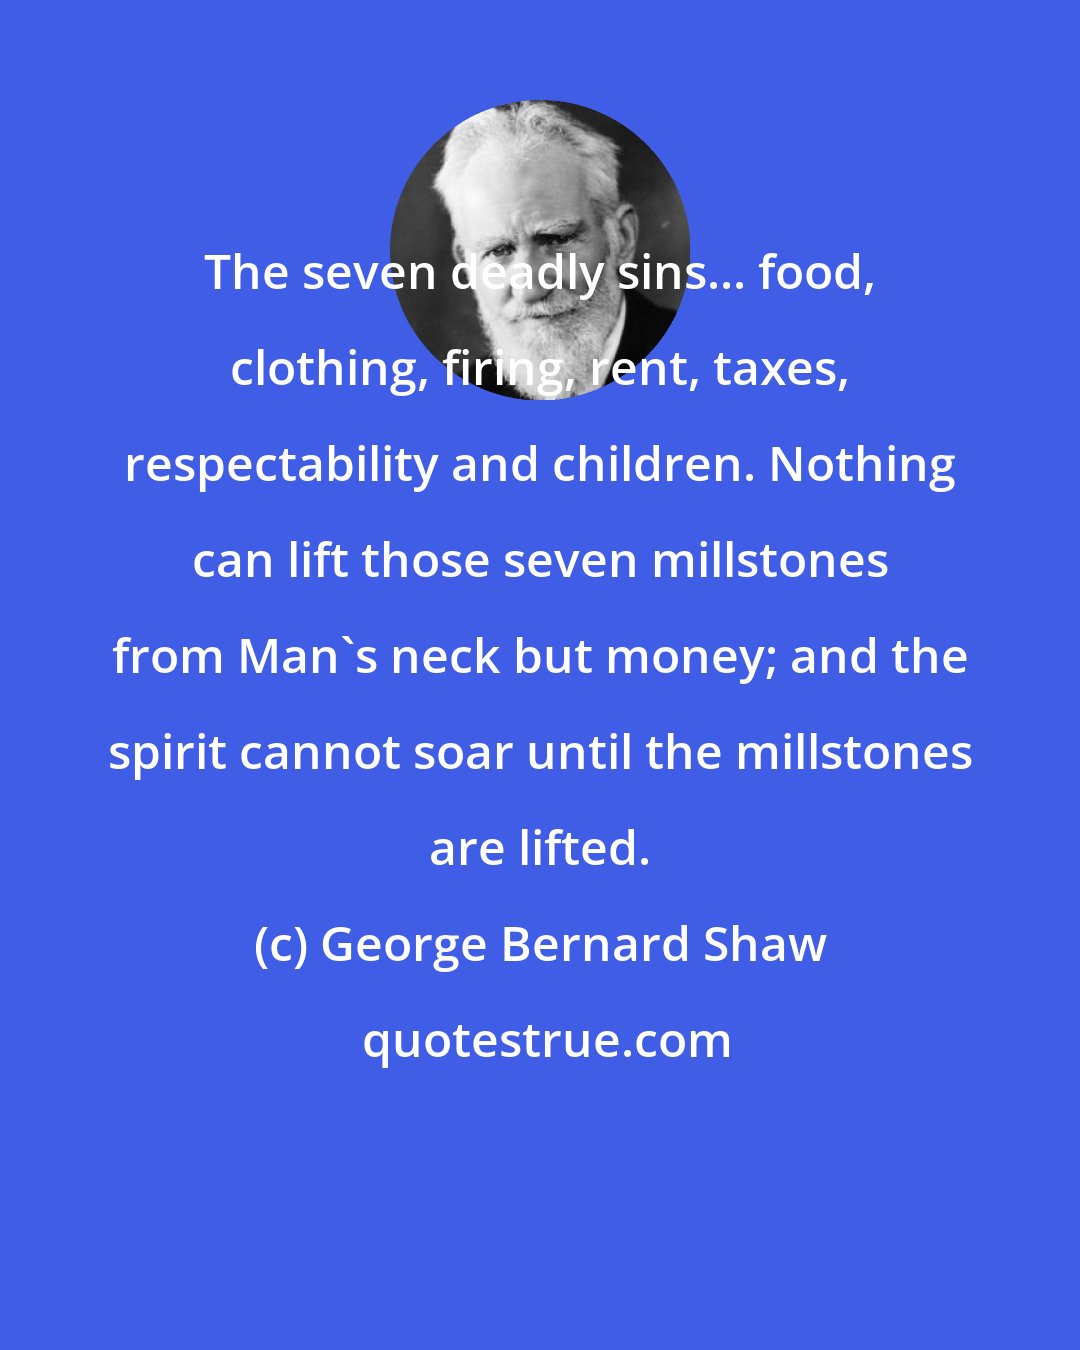 George Bernard Shaw: The seven deadly sins... food, clothing, firing, rent, taxes, respectability and children. Nothing can lift those seven millstones from Man's neck but money; and the spirit cannot soar until the millstones are lifted.